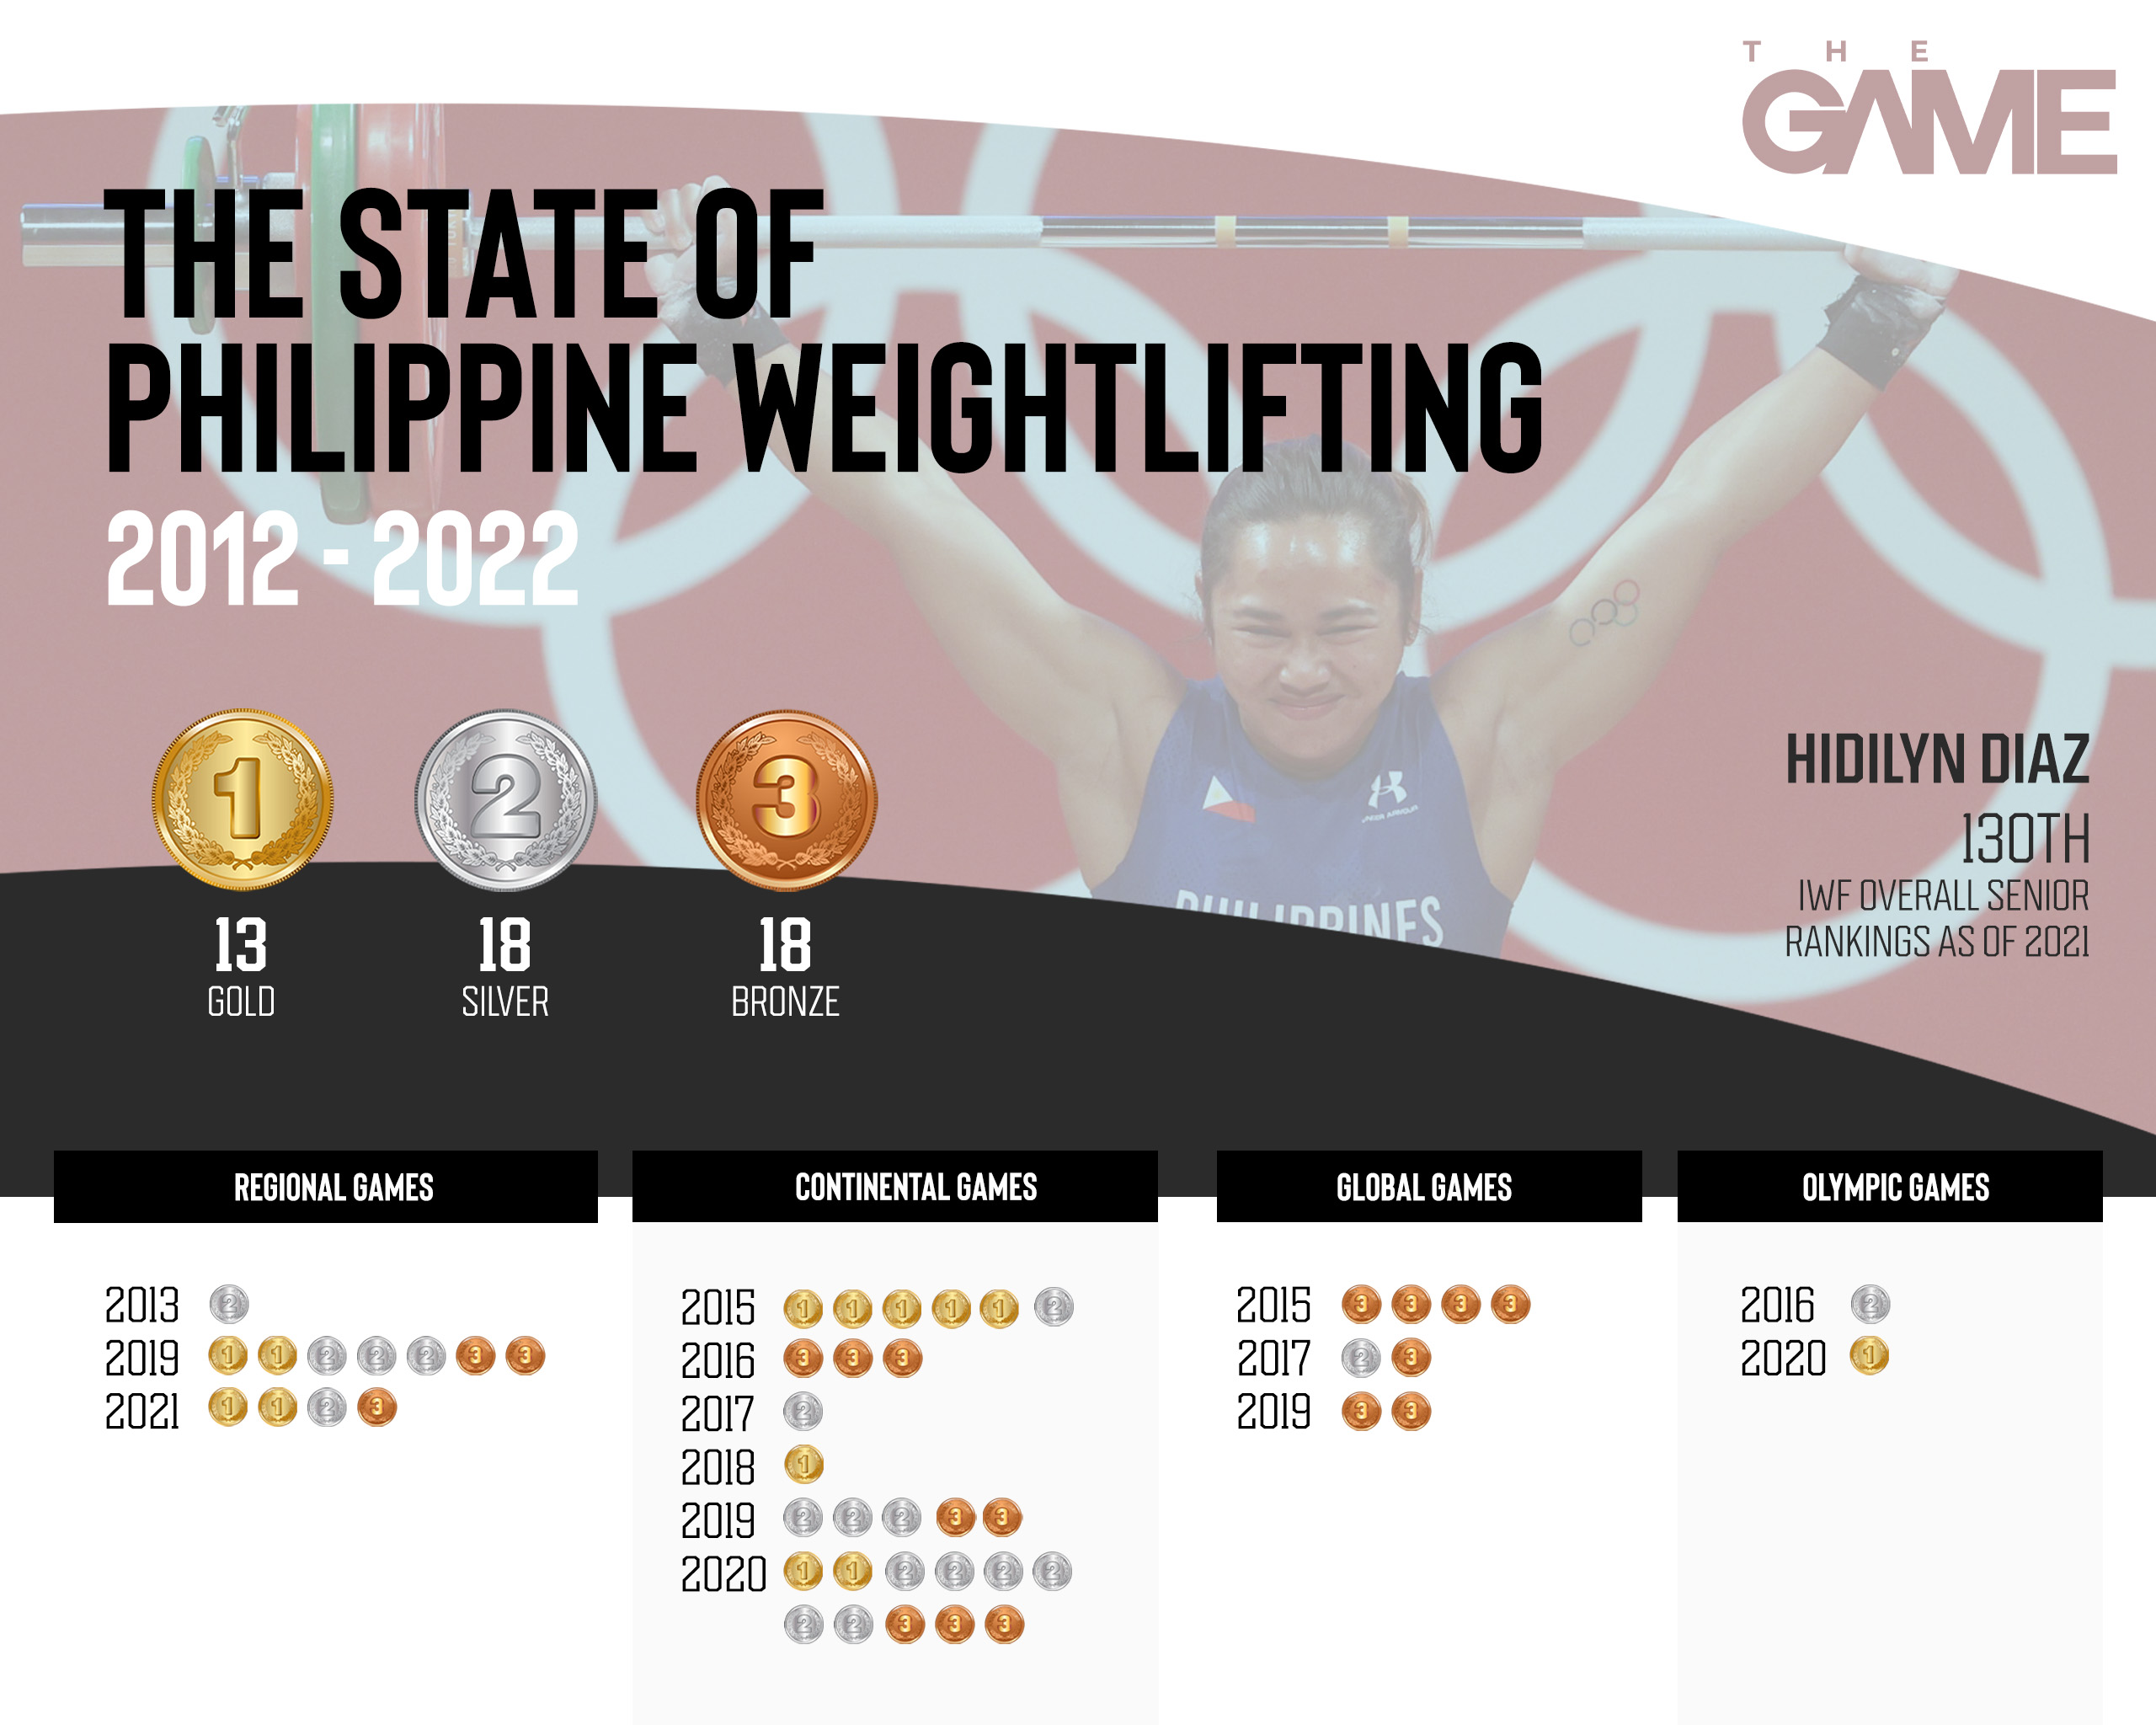 The Philippines' weightlifting medals from 2012 to 2022.